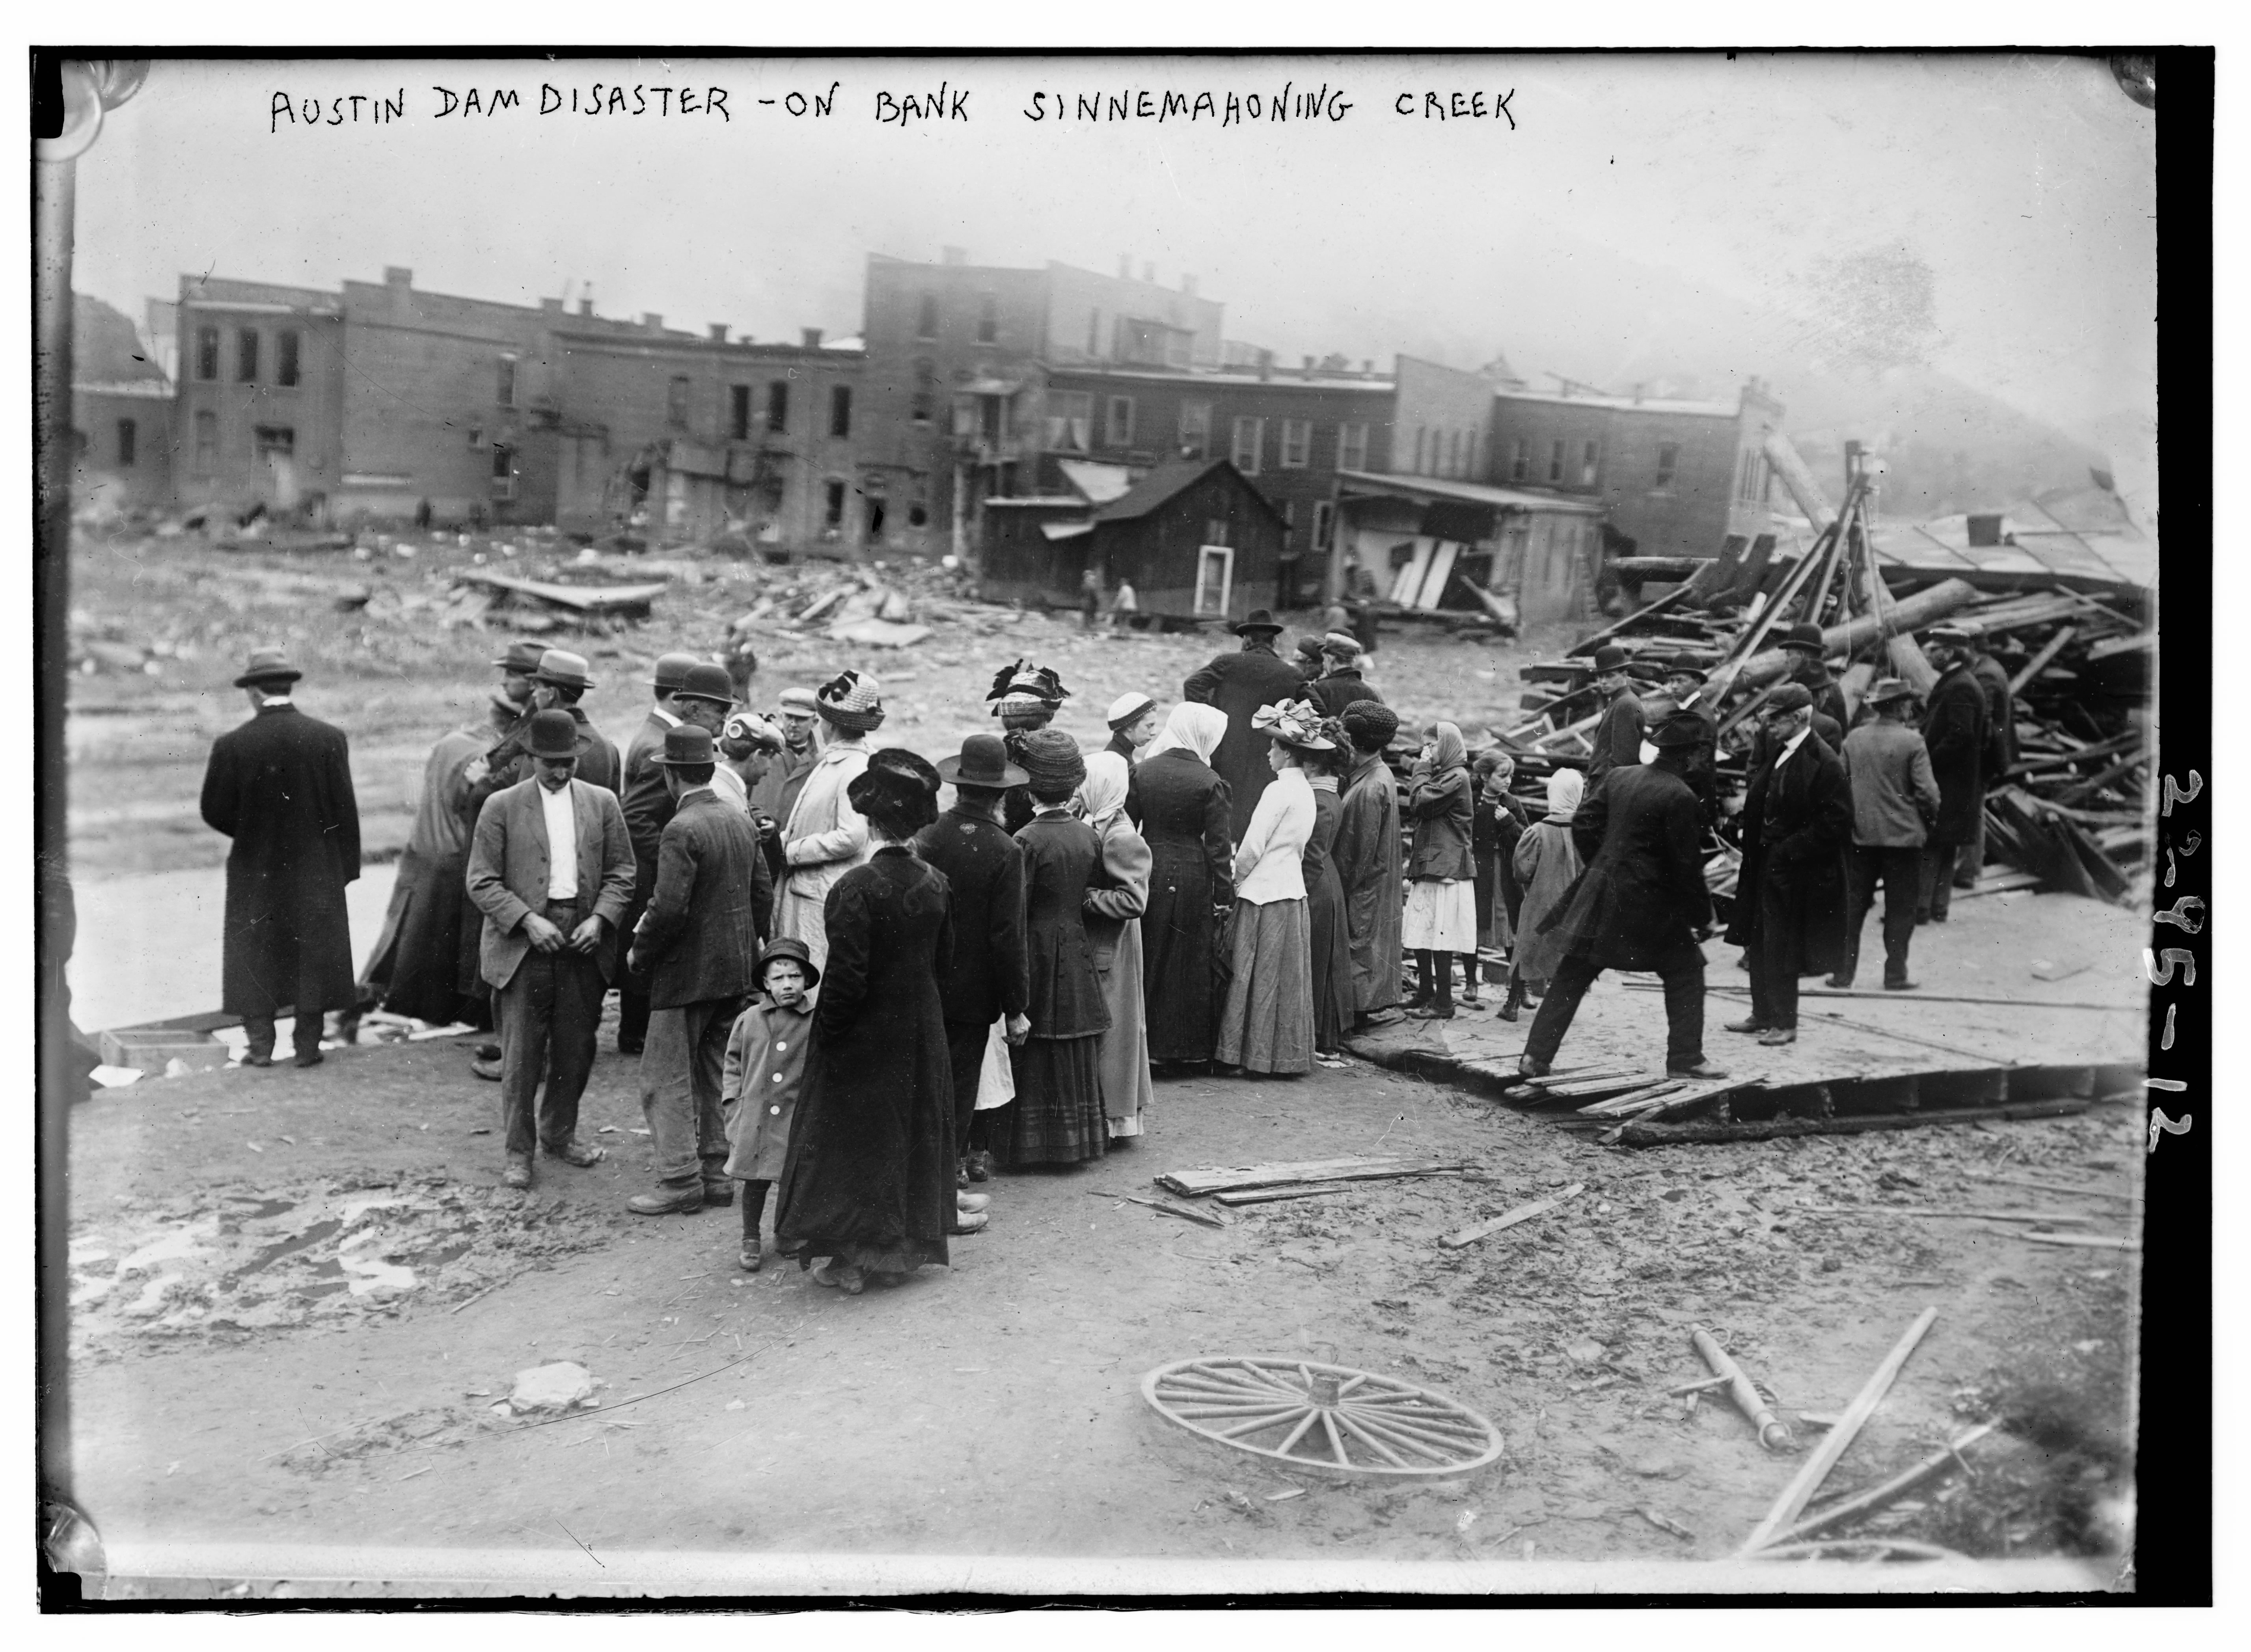 Onlookers survey damage in the aftermath of the Austin Flood